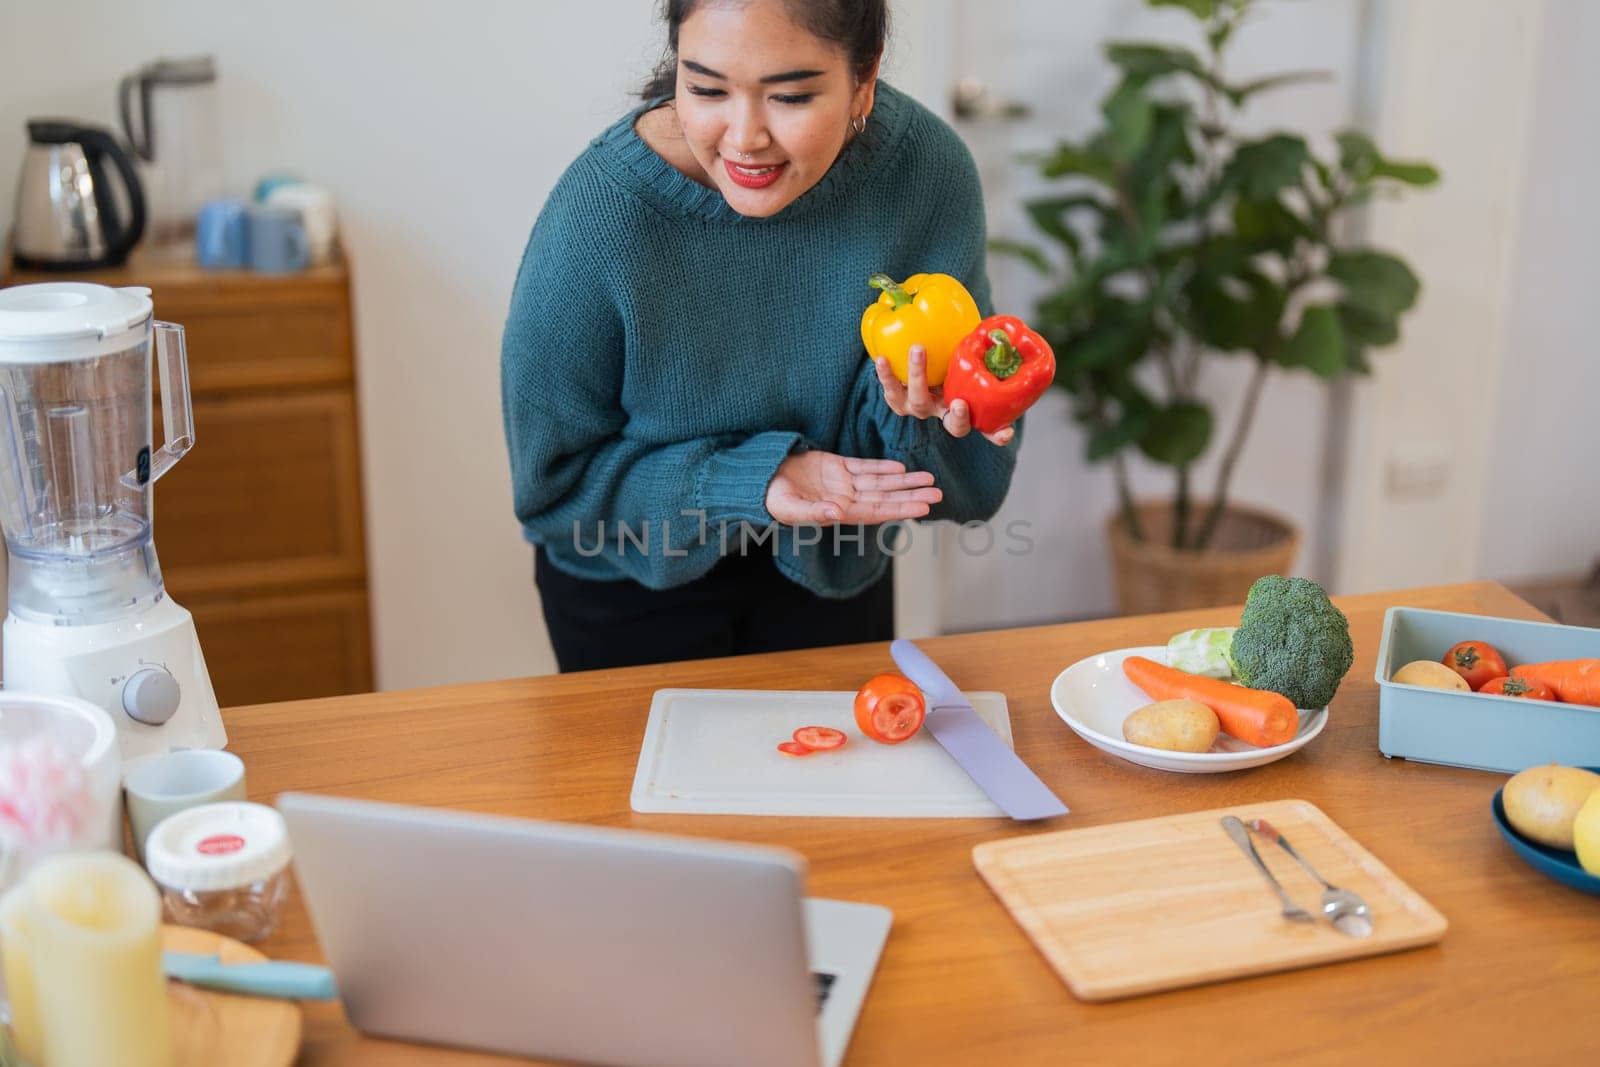 Fat woman cooking in kitchen. health care concept Eat health food to lose weight. Learn to make salads and healthy food from online.